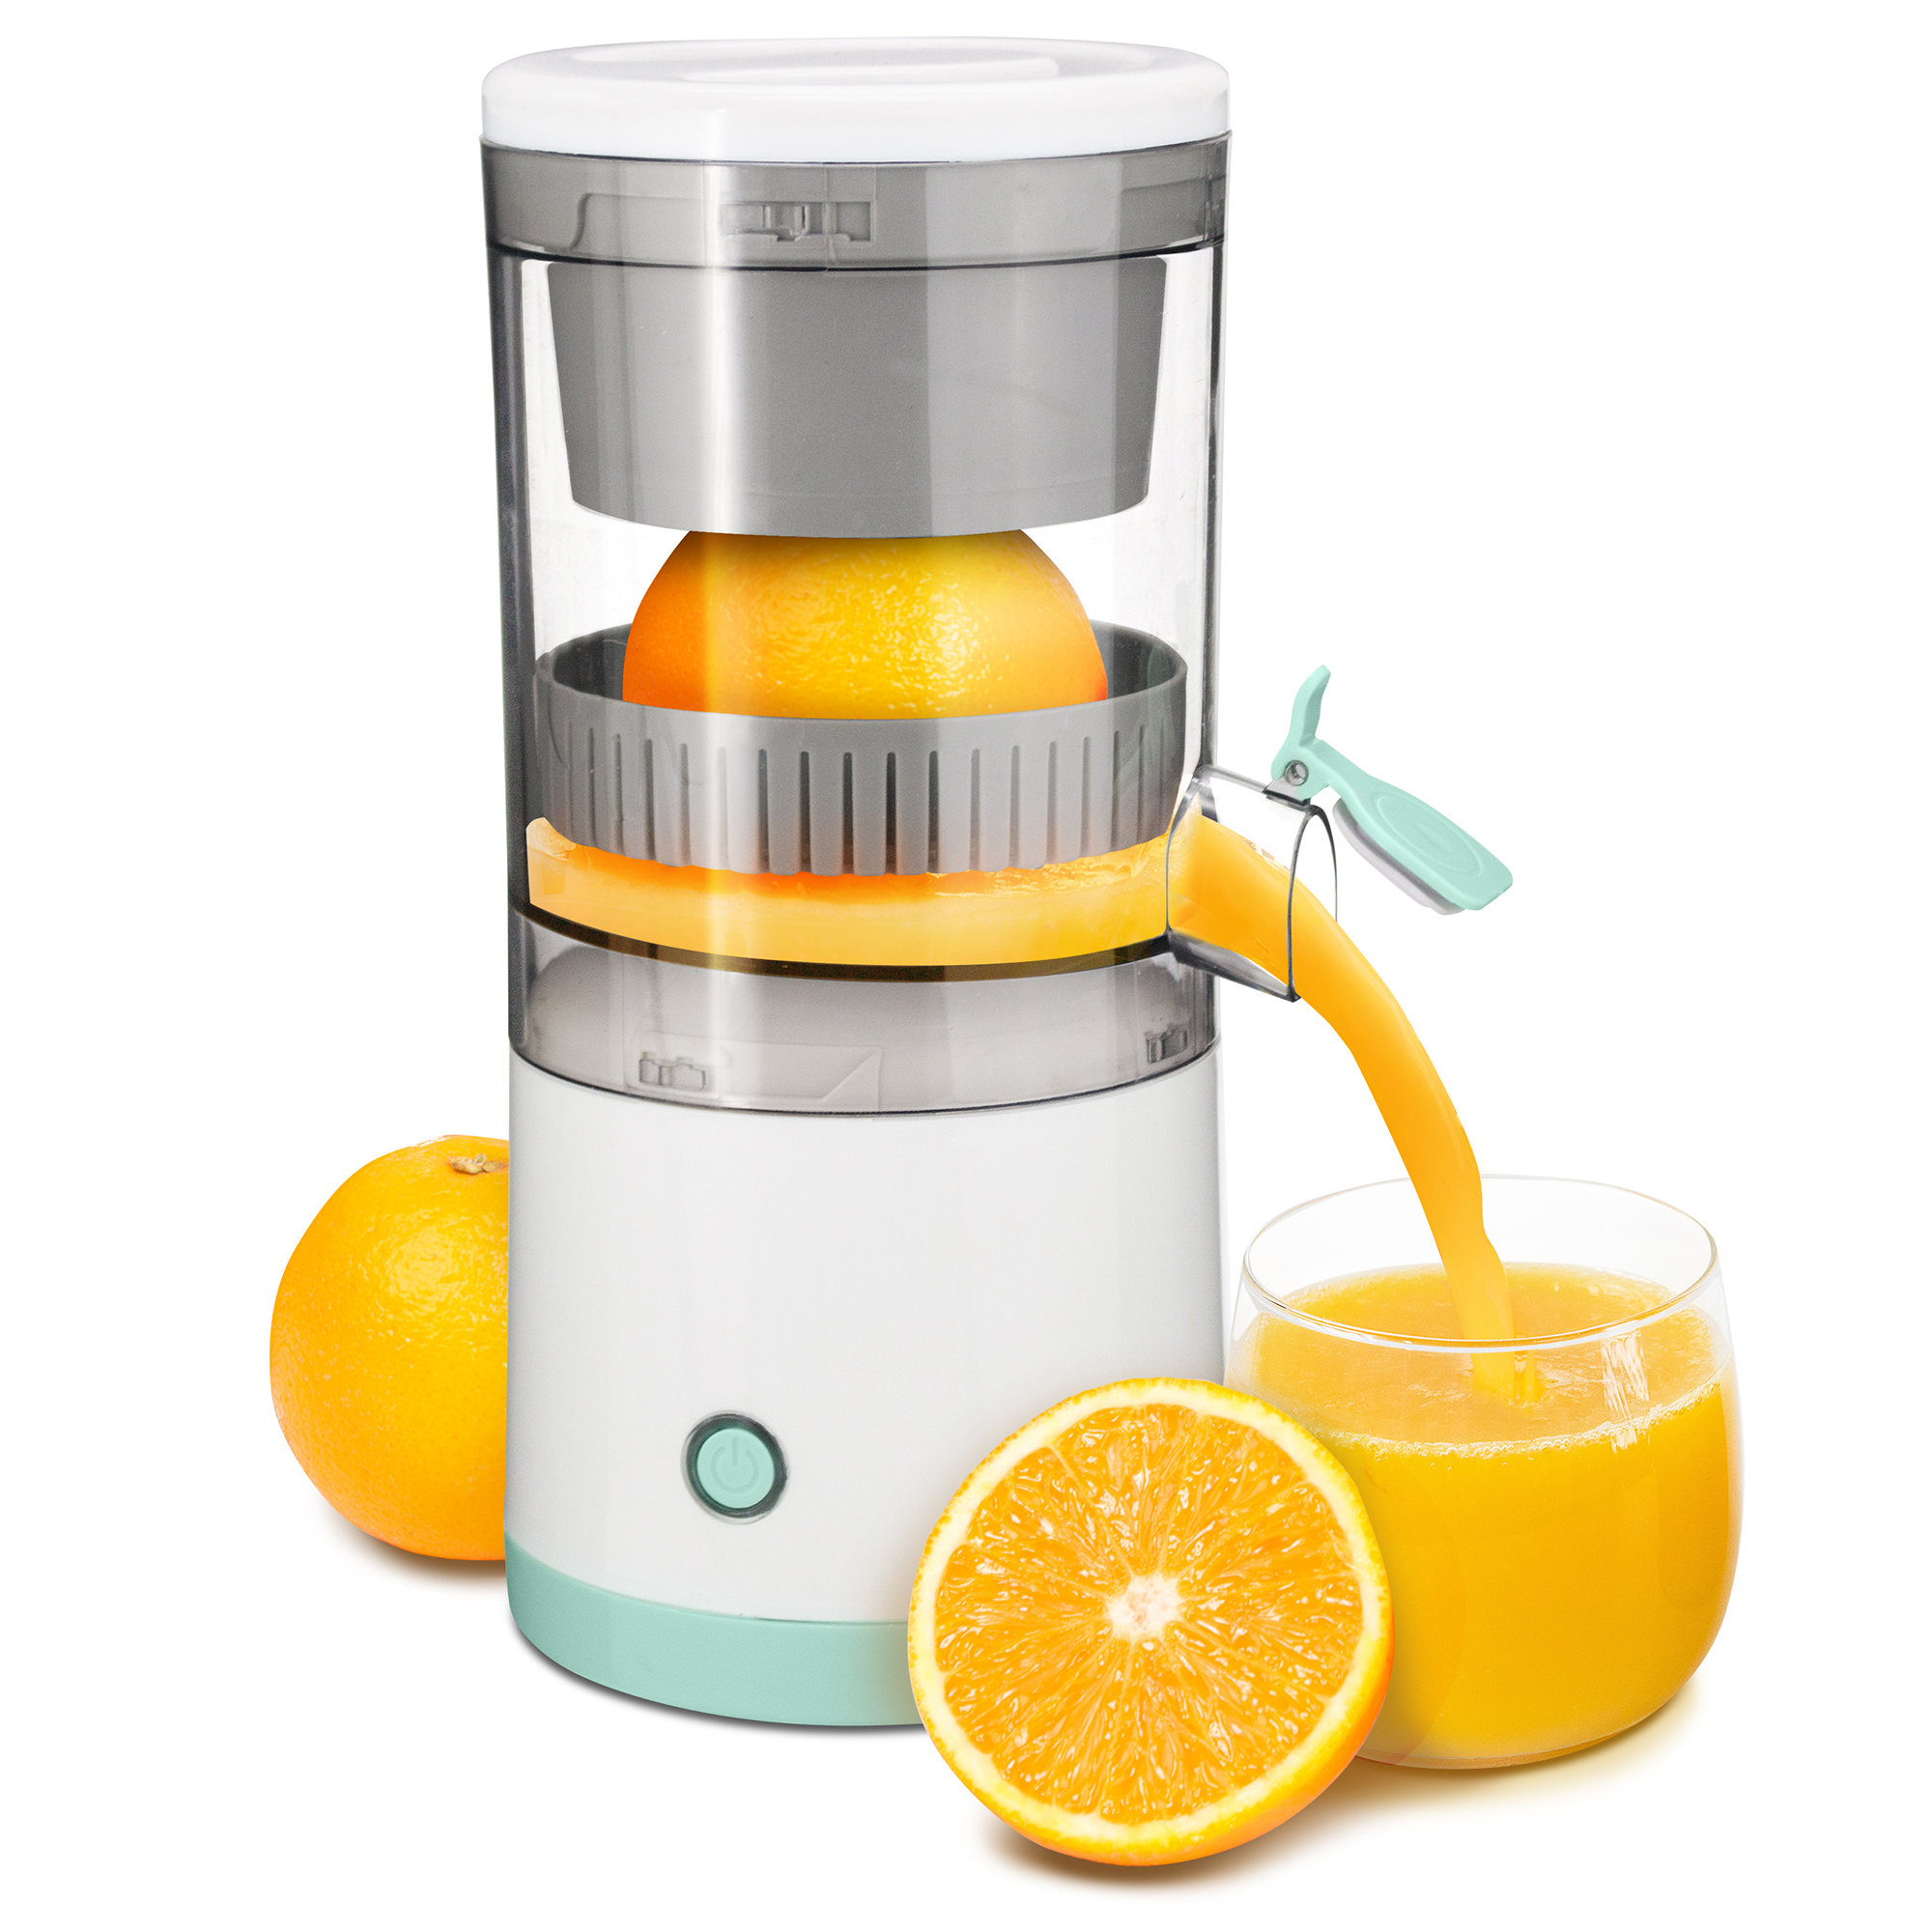 Juicer Machines for sale in West Chatham, Massachusetts